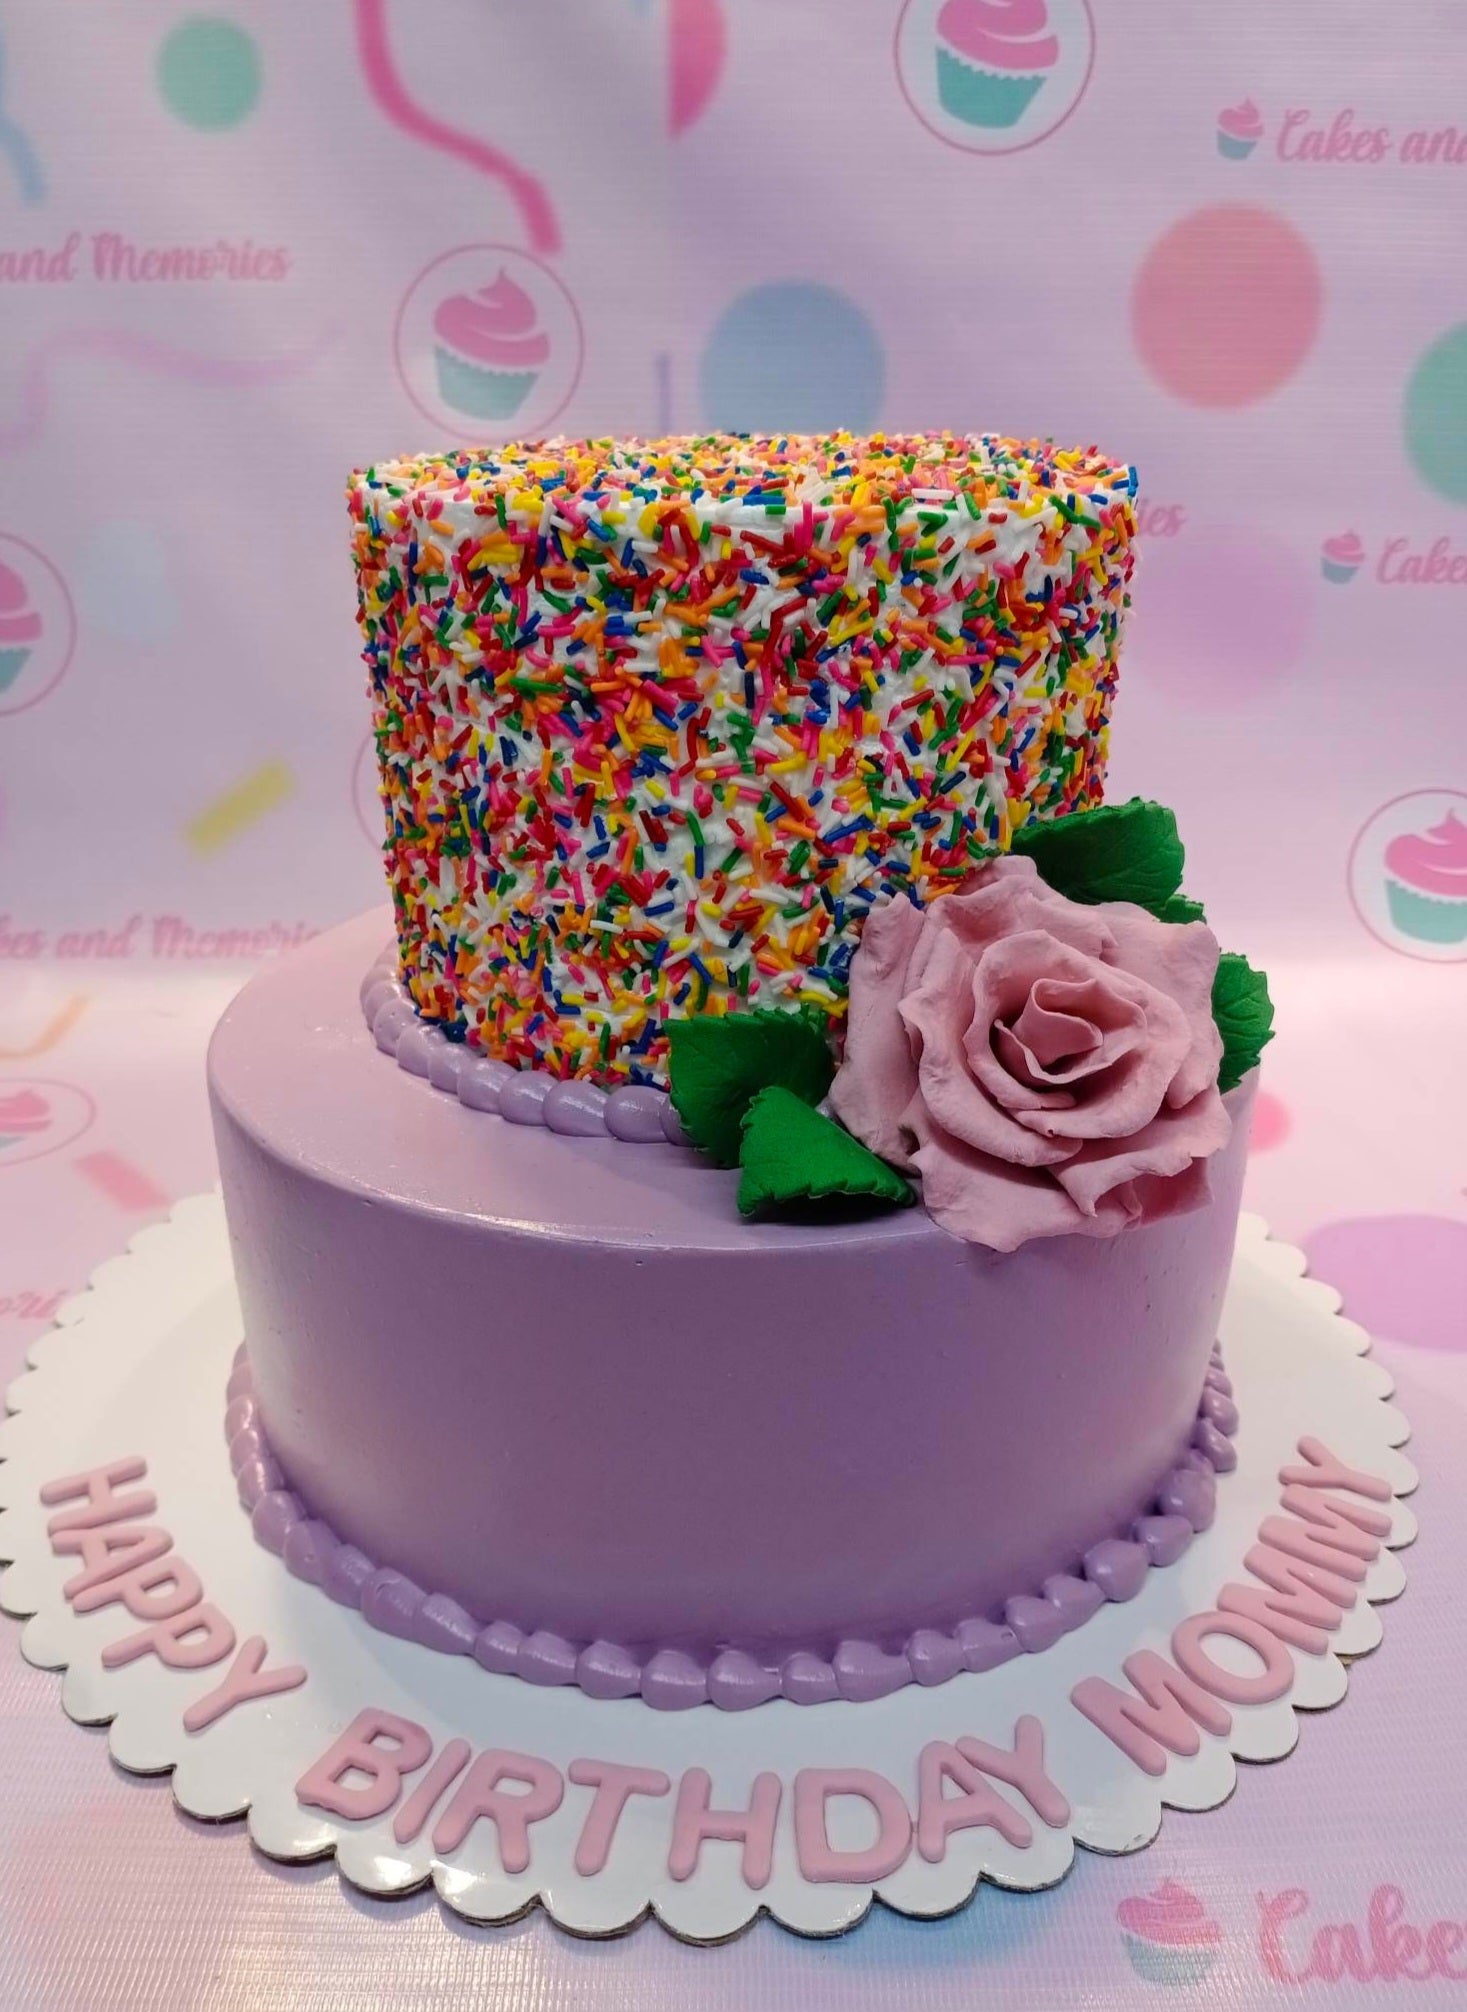 This delicious cake is a custom creation perfect for a special occasion. The cake features a beautiful floral design, with colorful rainbow and purple rose accents surrounded by a delightful sprinkle of candy. The perfect cake for a special 18th birthday or a mother's day.